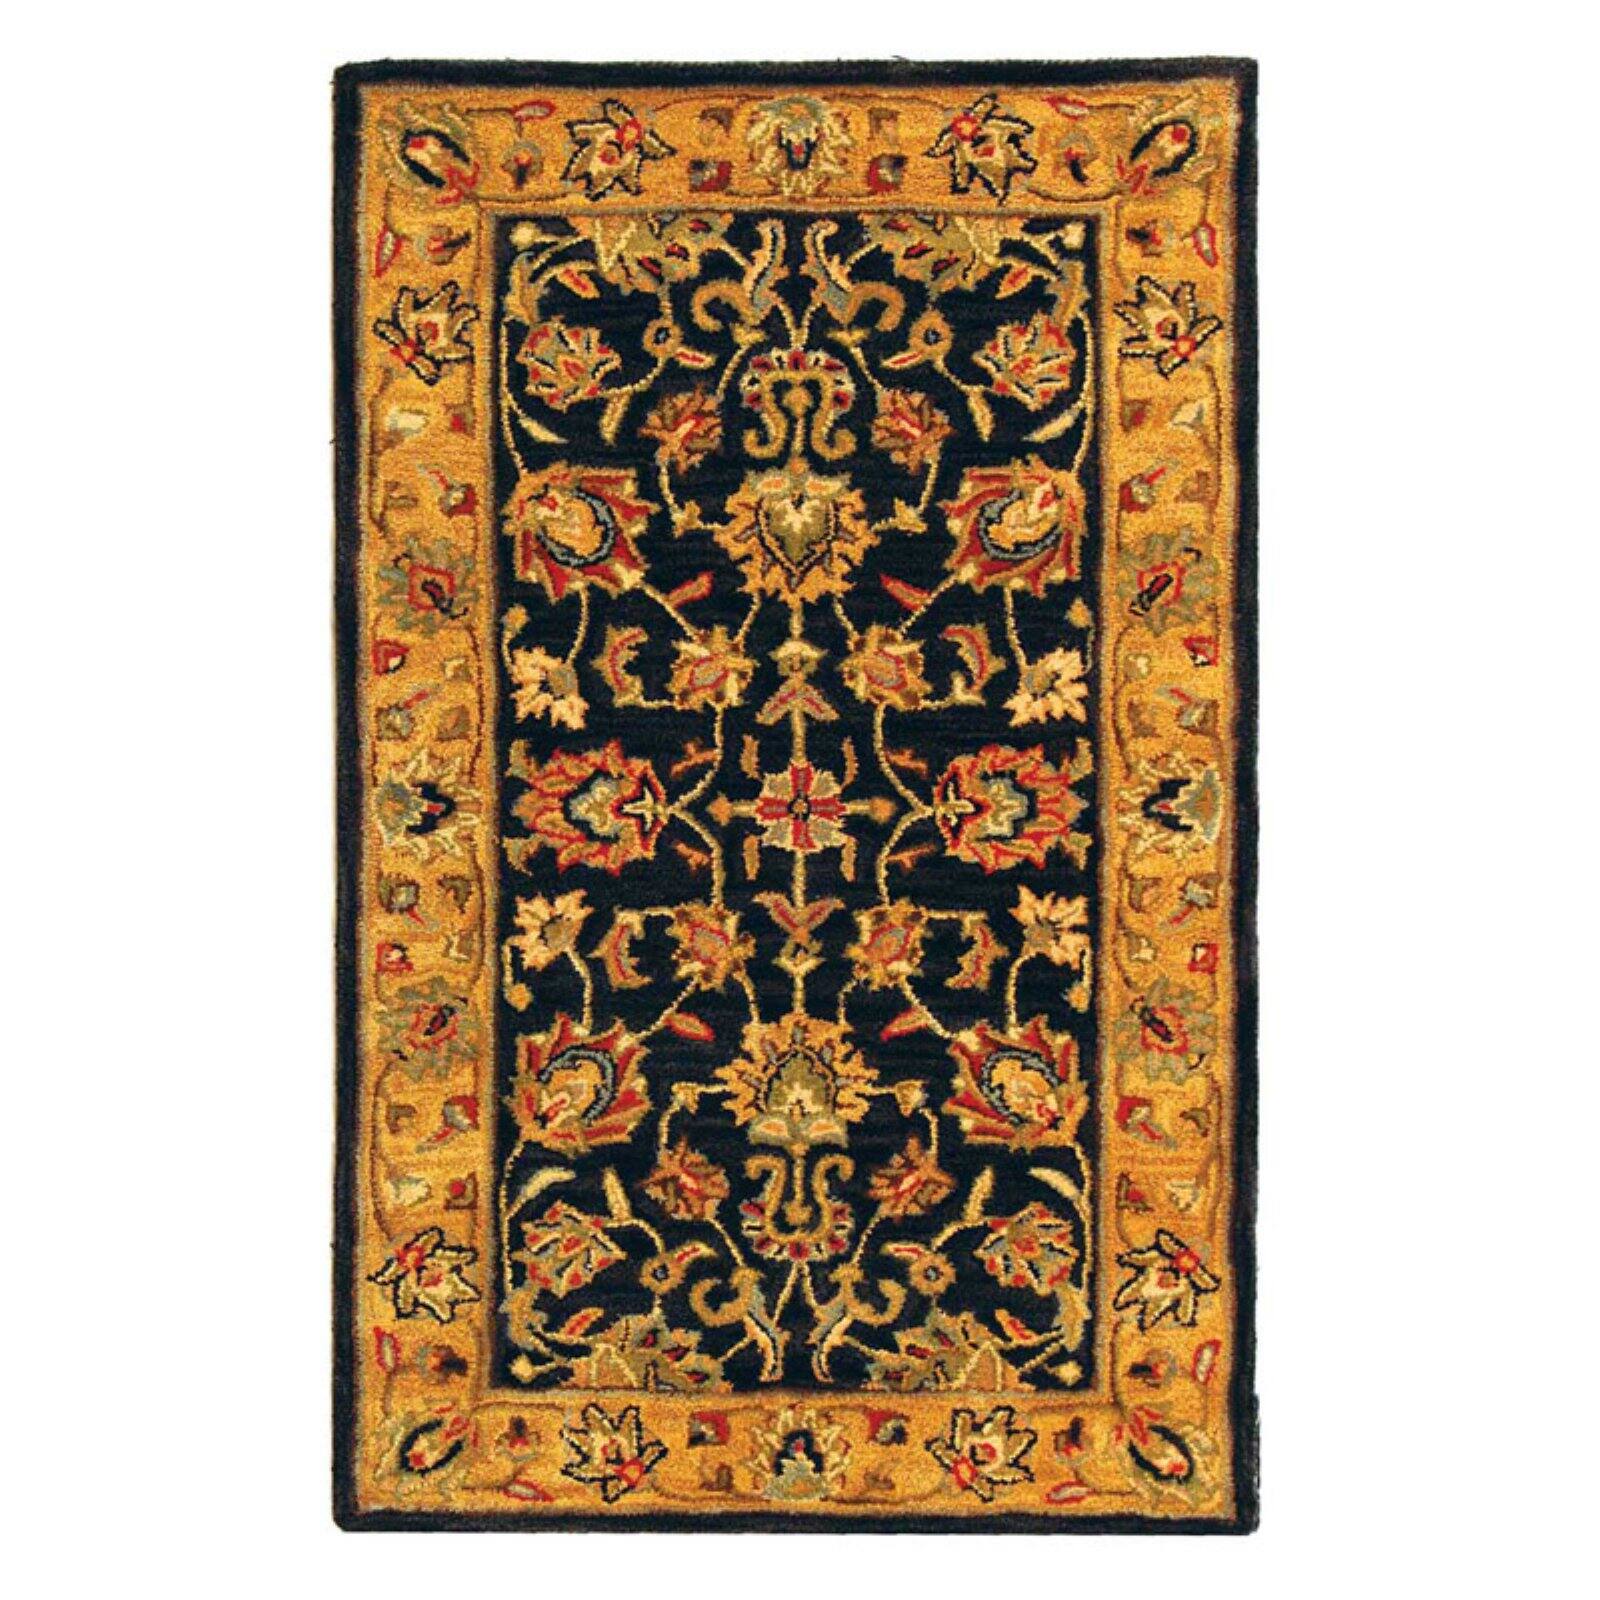 SAFAVIEH Heritage Regis Traditional Wool Area Rug, Charcoal/Gold, 7'6" x 9'6" Oval - image 5 of 10